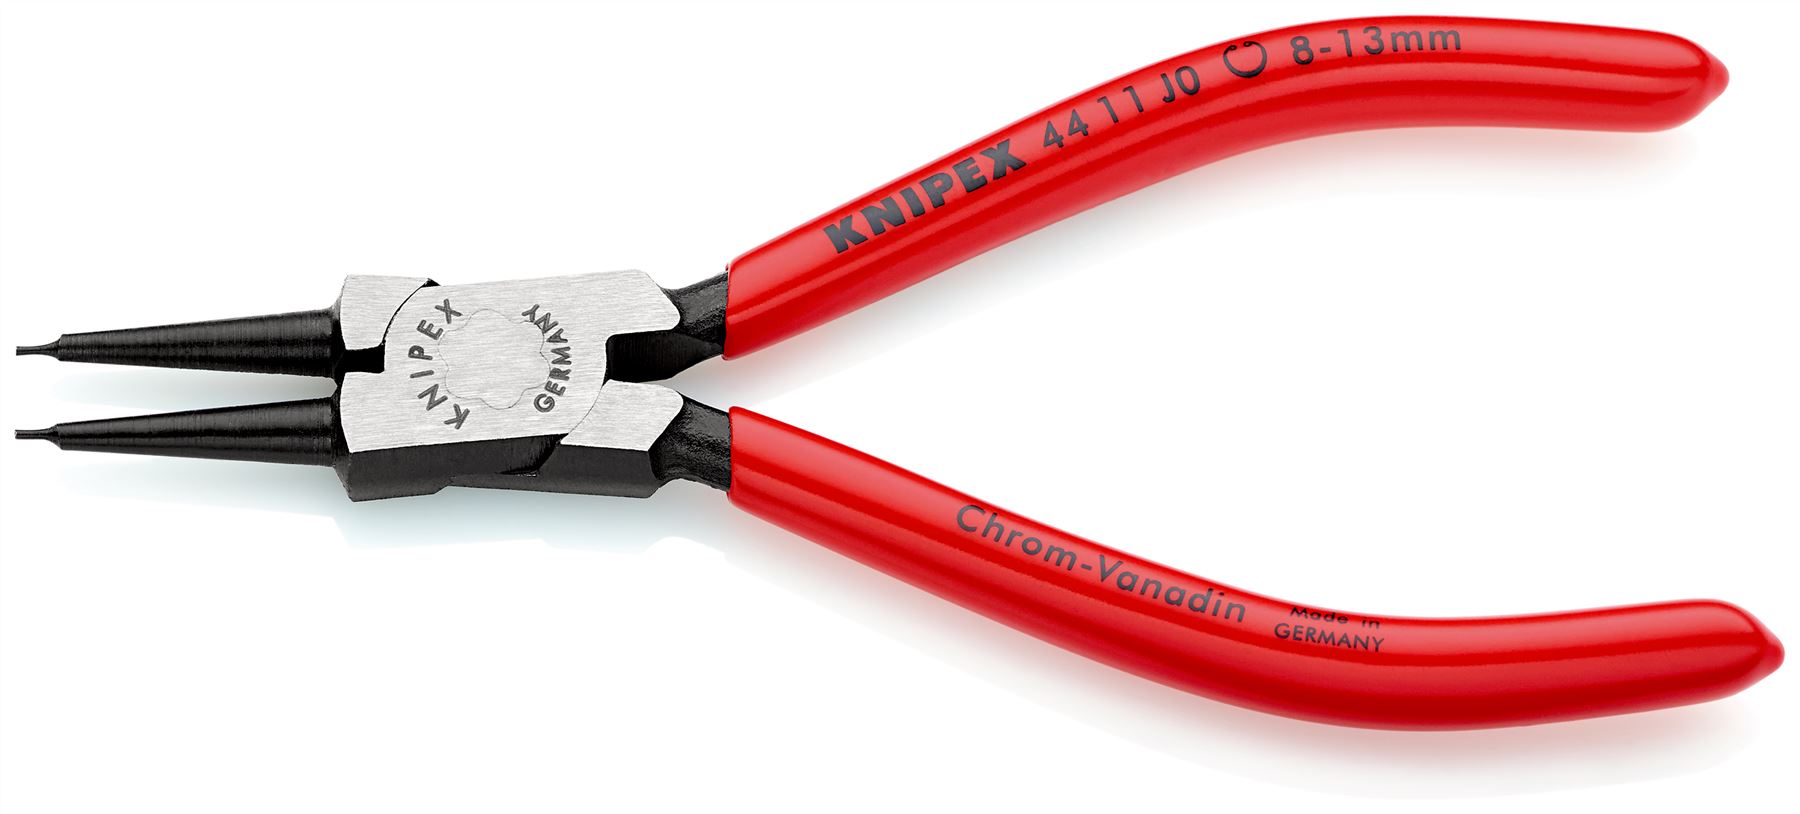 KNIPEX Circlip Pliers for Internal Circlips in Bore Holes 140mm 0.9mm Diameter Tips 44 11 J0